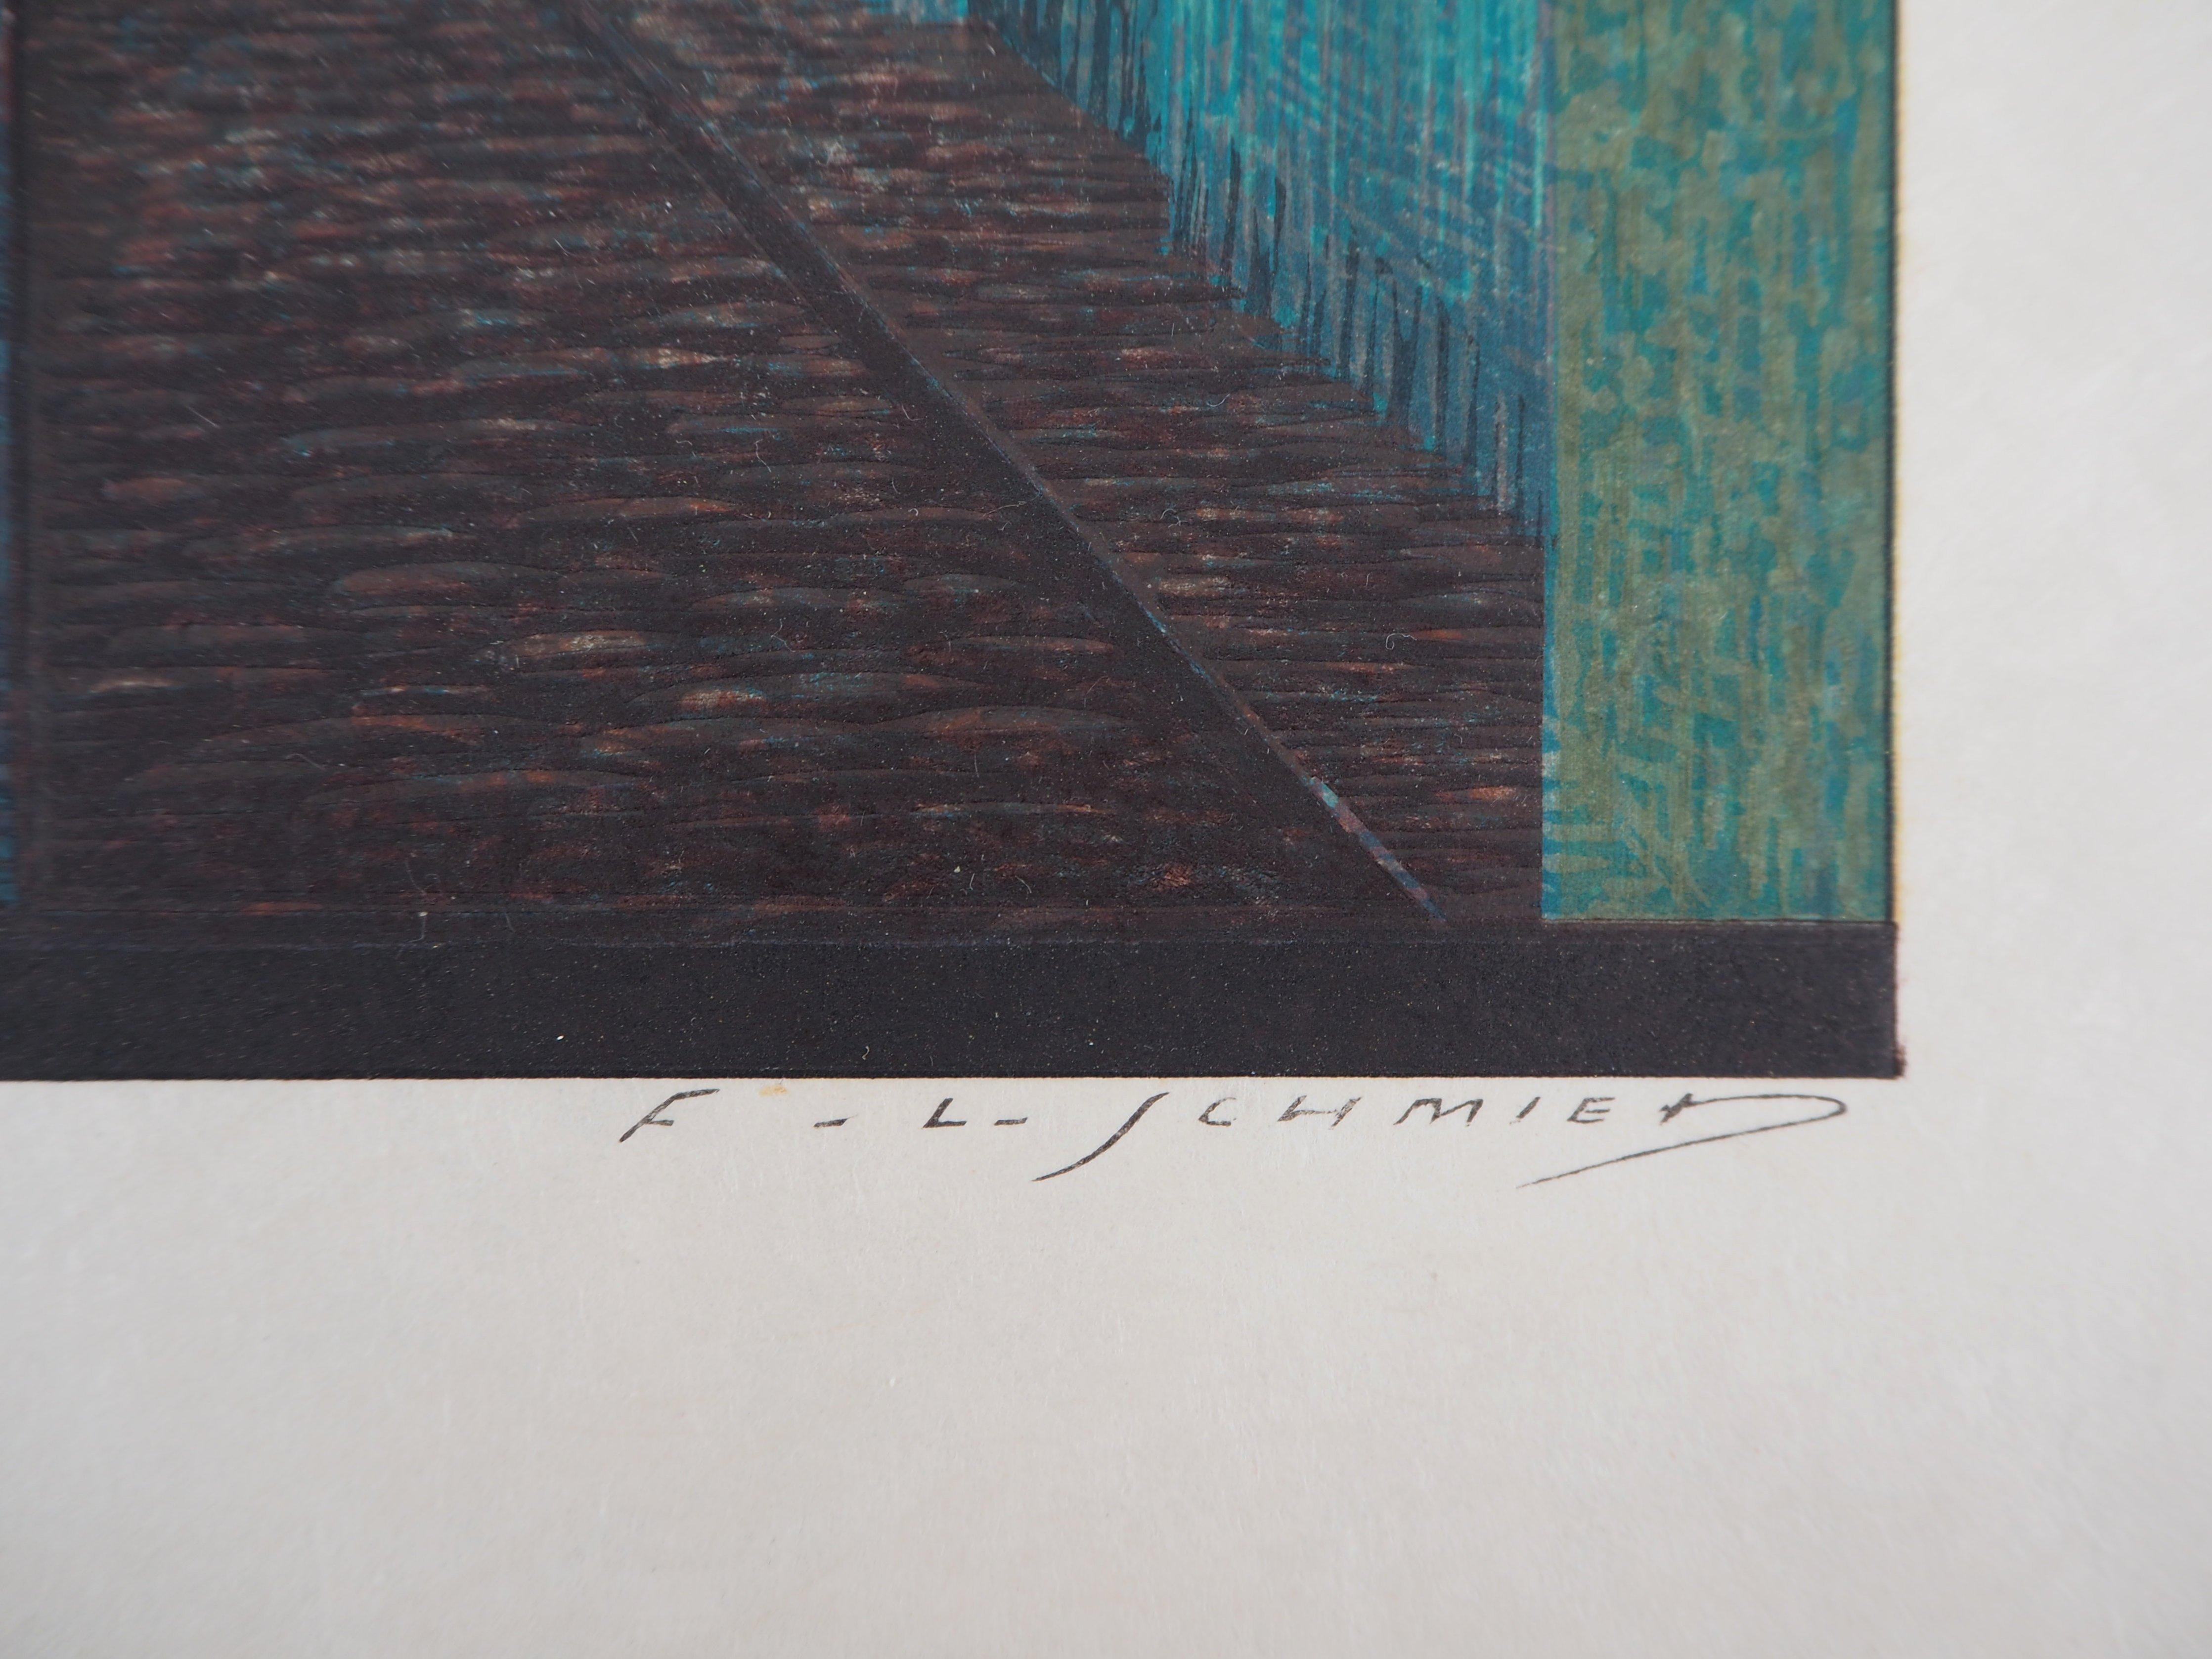 François-Louis SCHMIED (1873-1941)
The Alley in the night, 1938

Original Woodcut Print
Signed with the stamp of the artist
On Japan paper
35 x 24 cm (c. 13.8 x 9.5 inch)

Very good condition, light marks of manipulation in the margins